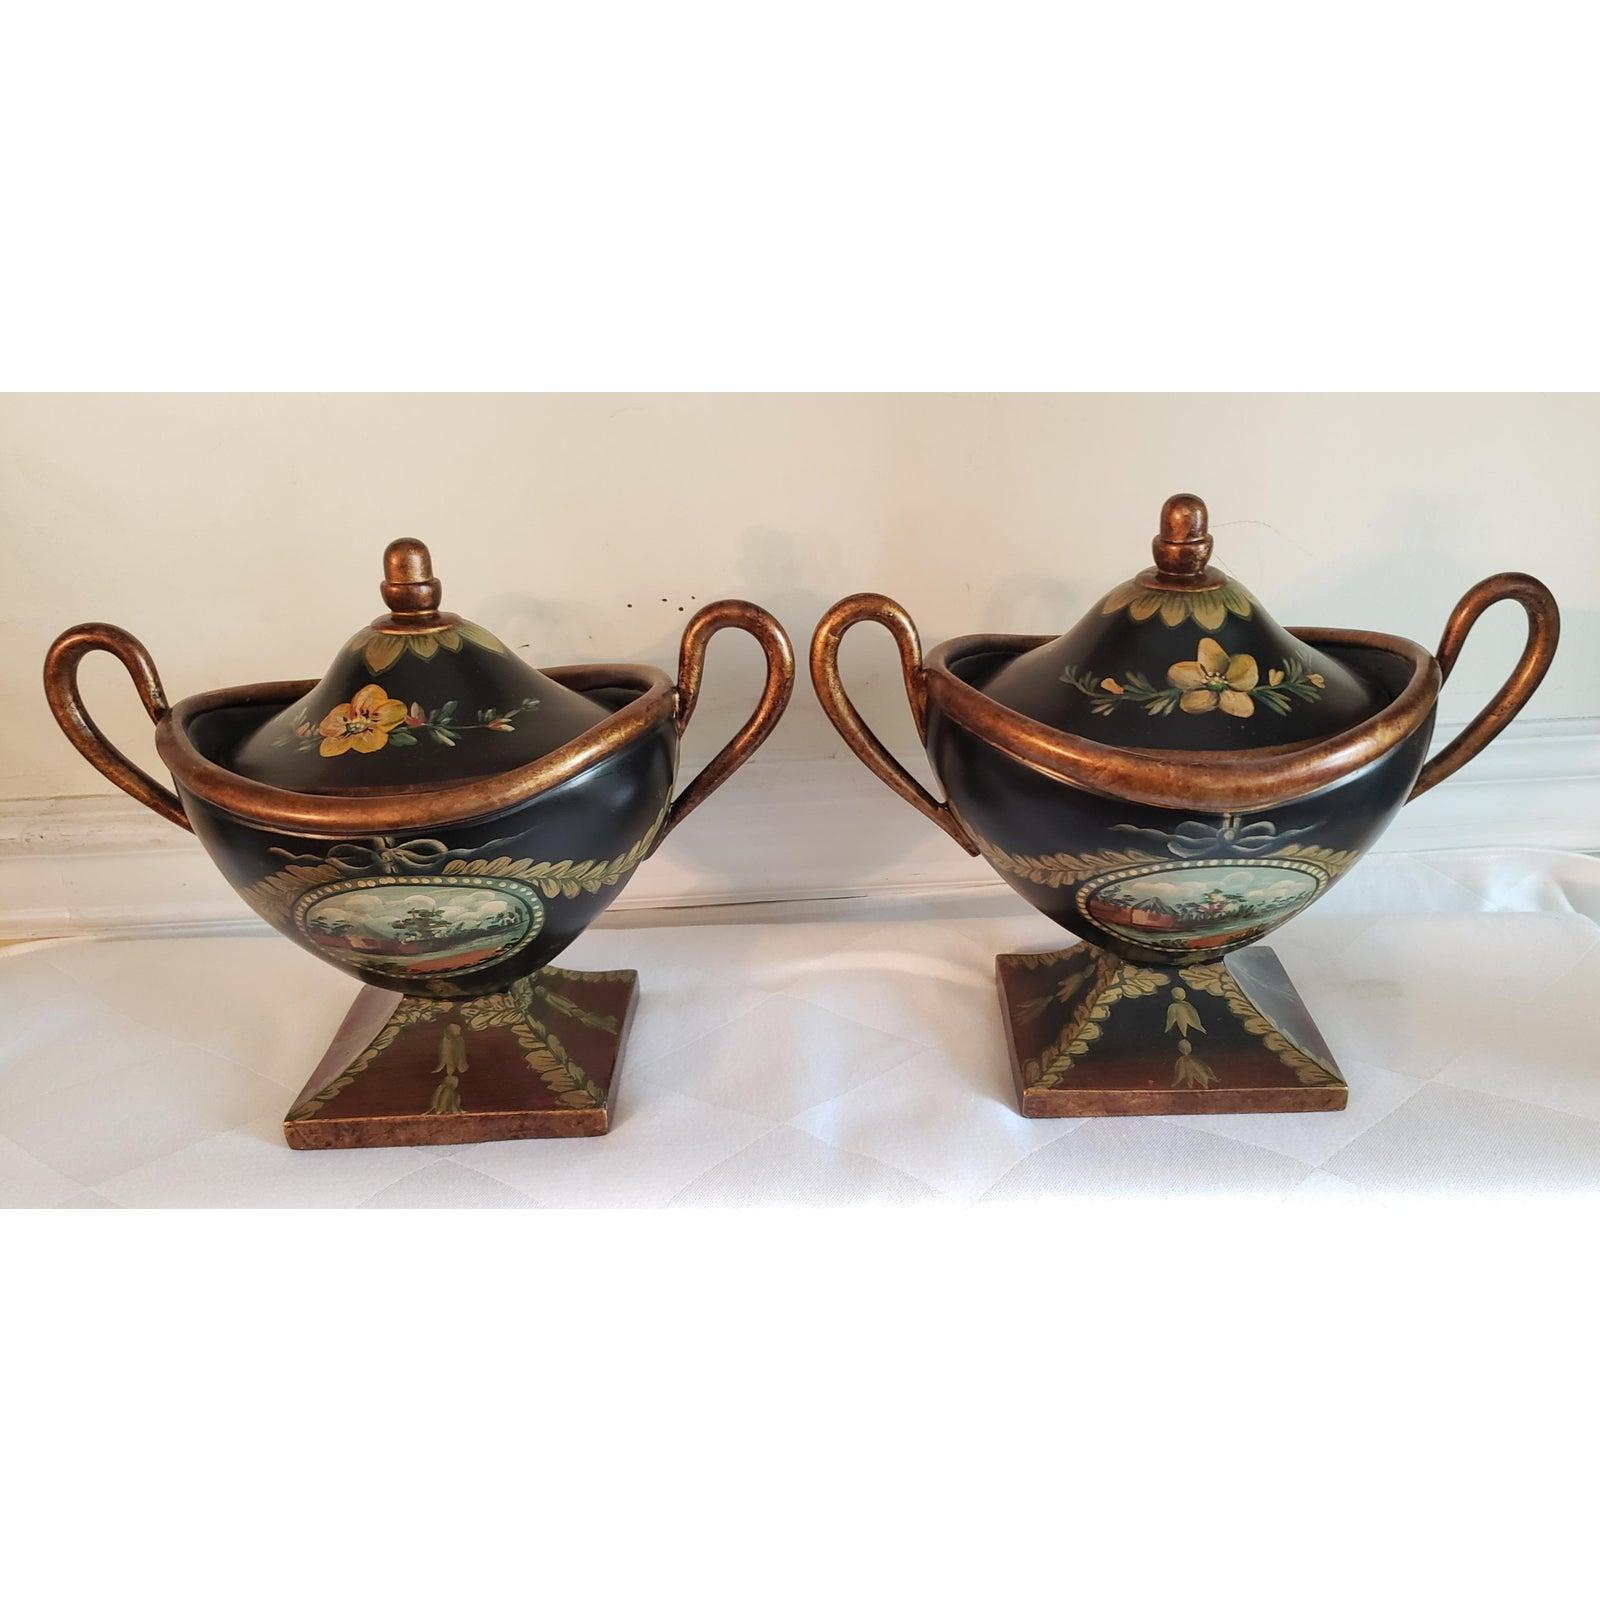 Japanese Vintage 1950s Hand Painted Decorative Ceramic Urns, a Pair For Sale